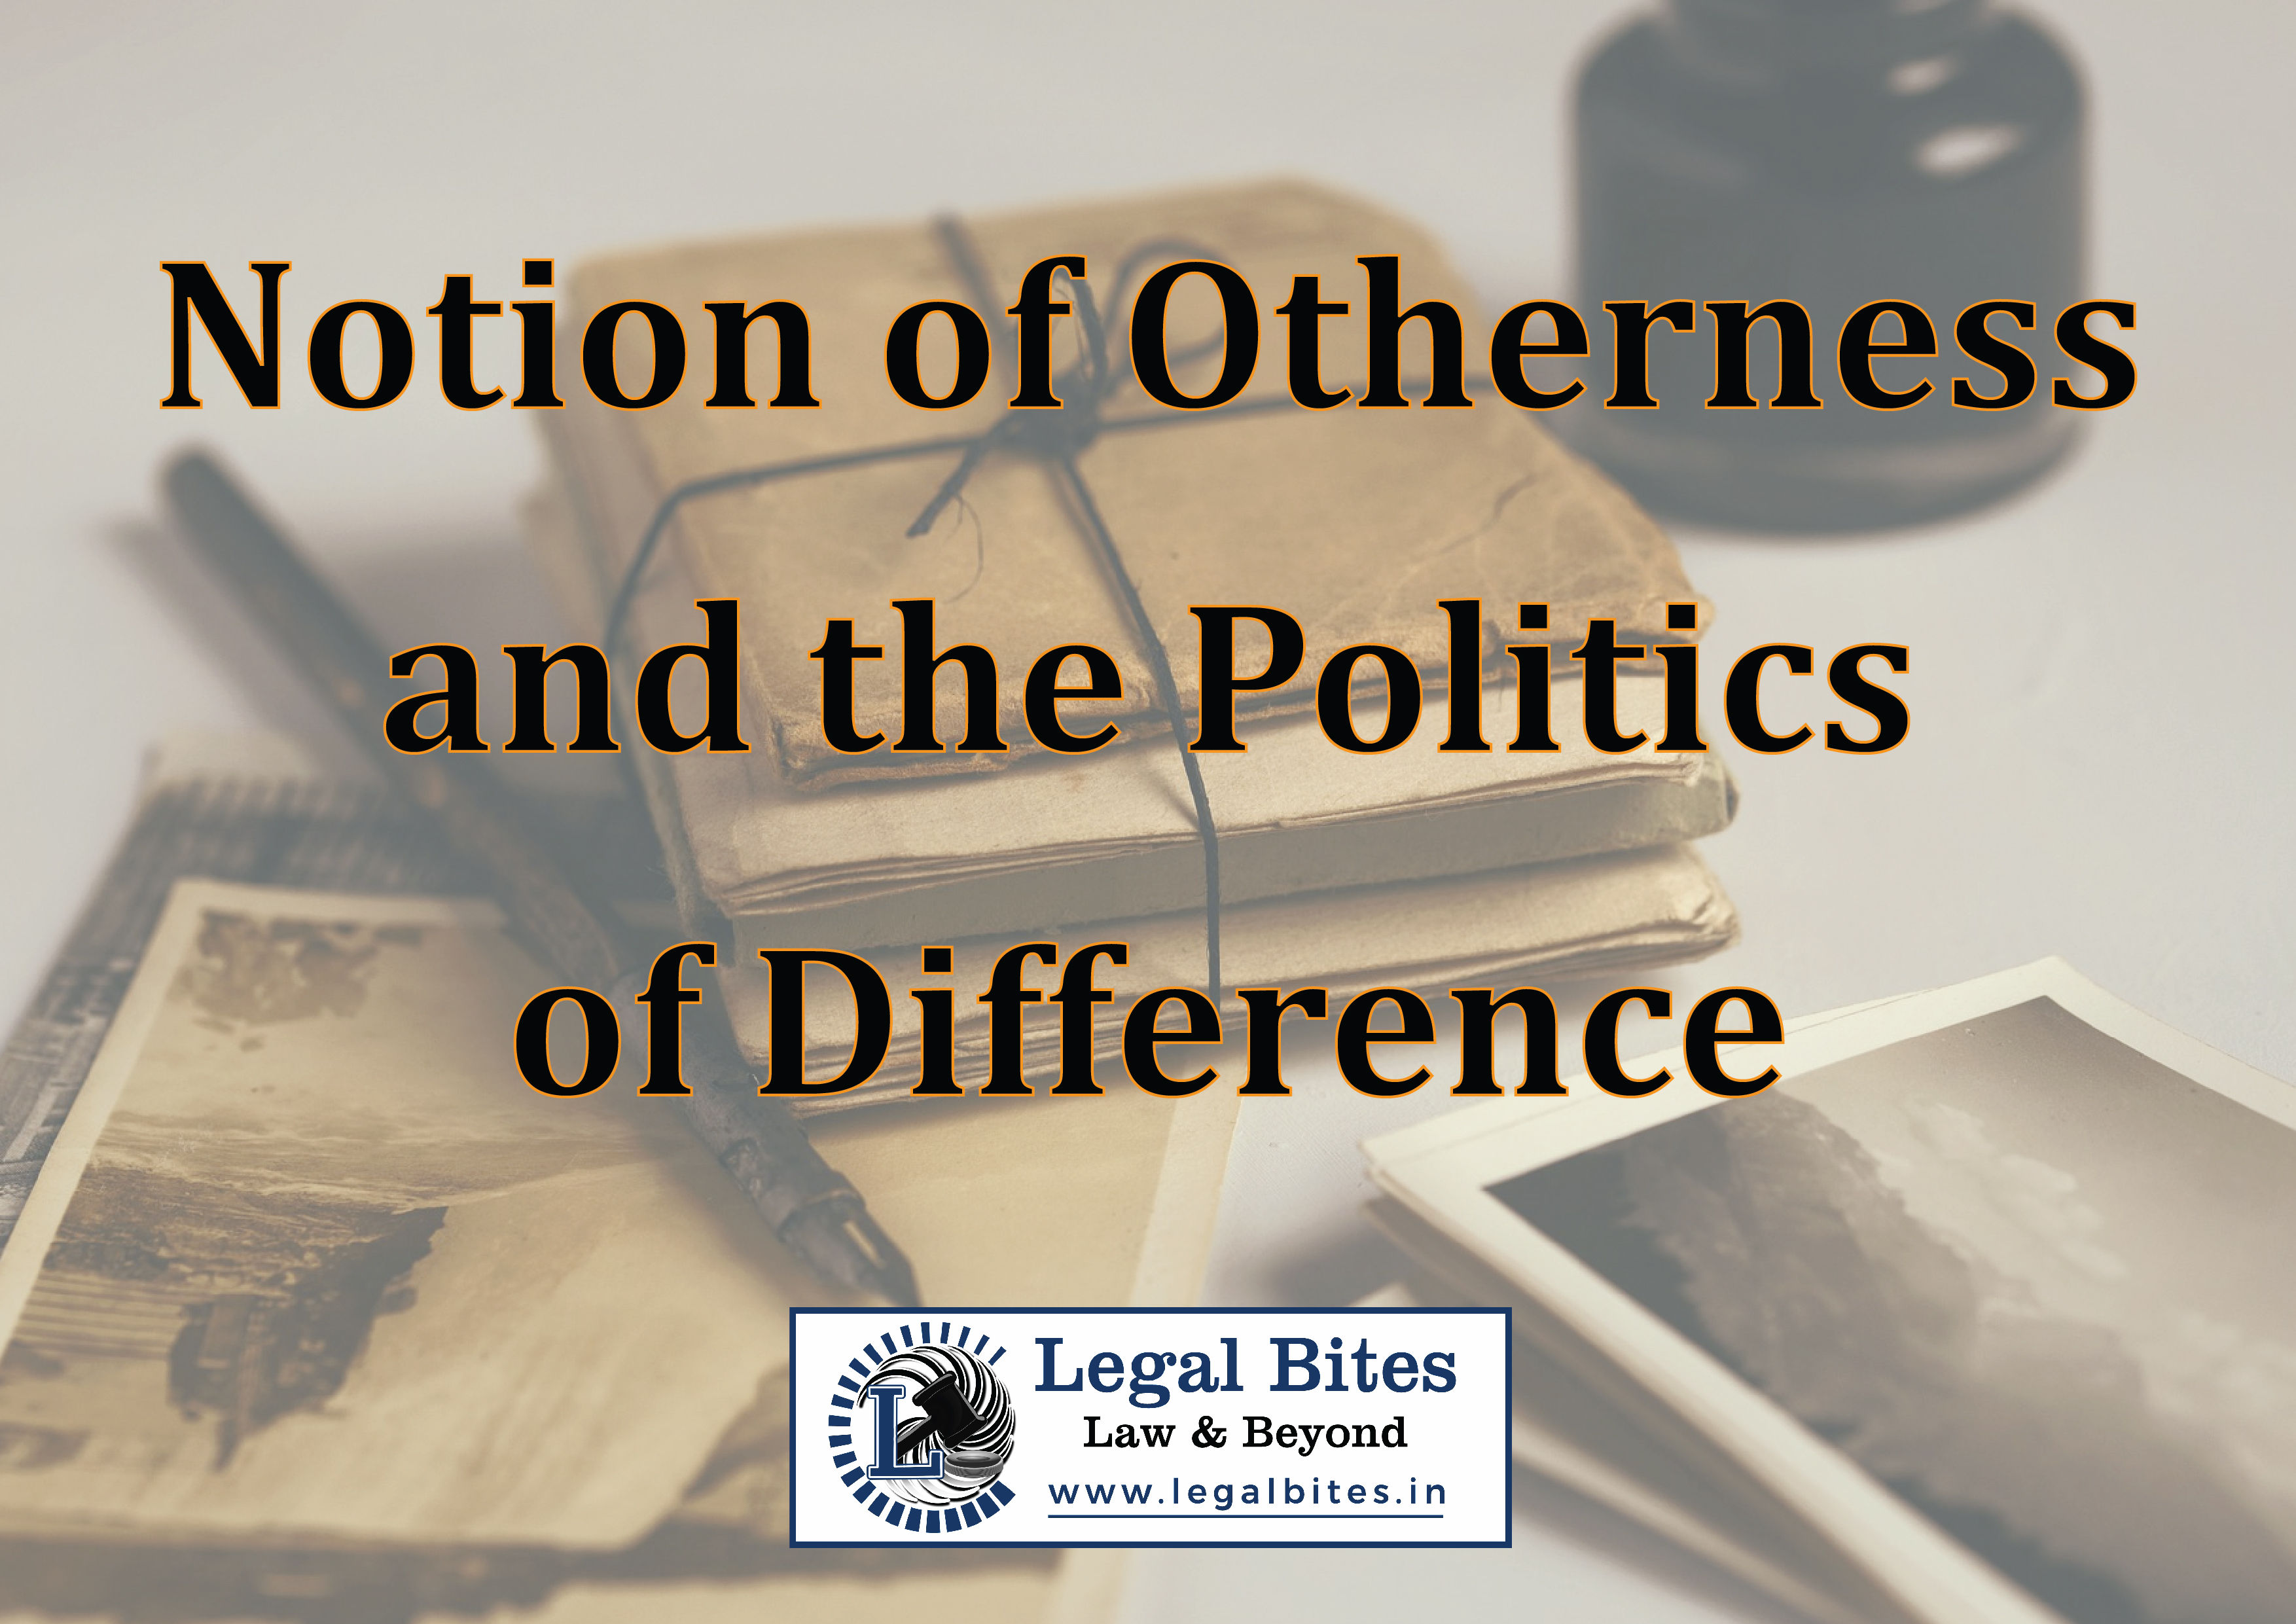 Notion of Otherness and the Politics of Difference